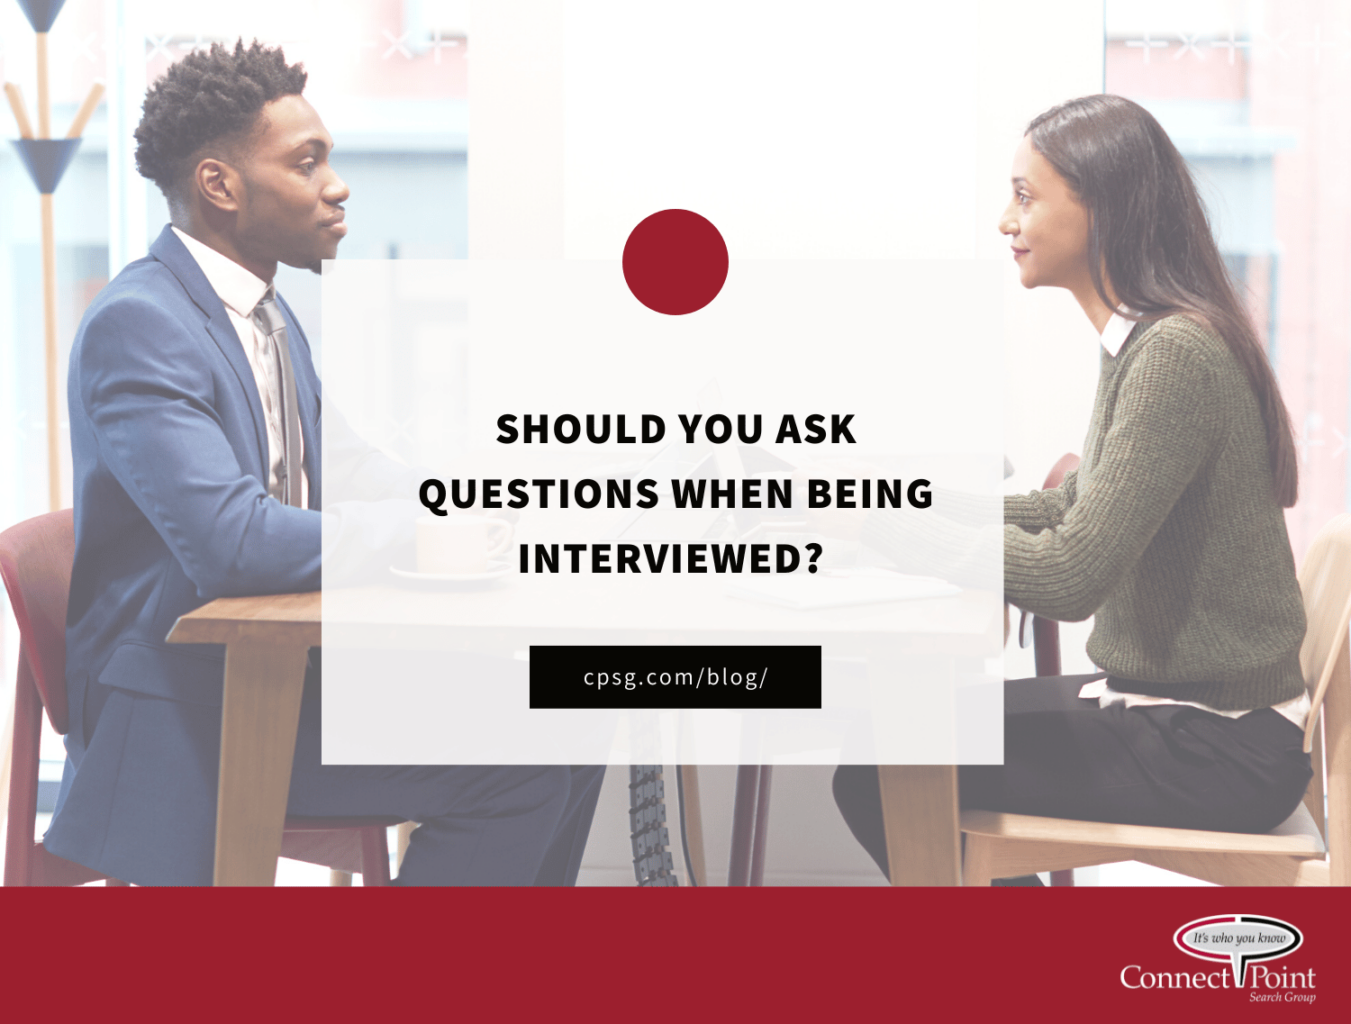 CPSG Blog - Should You Ask Questions When Being Interviewed